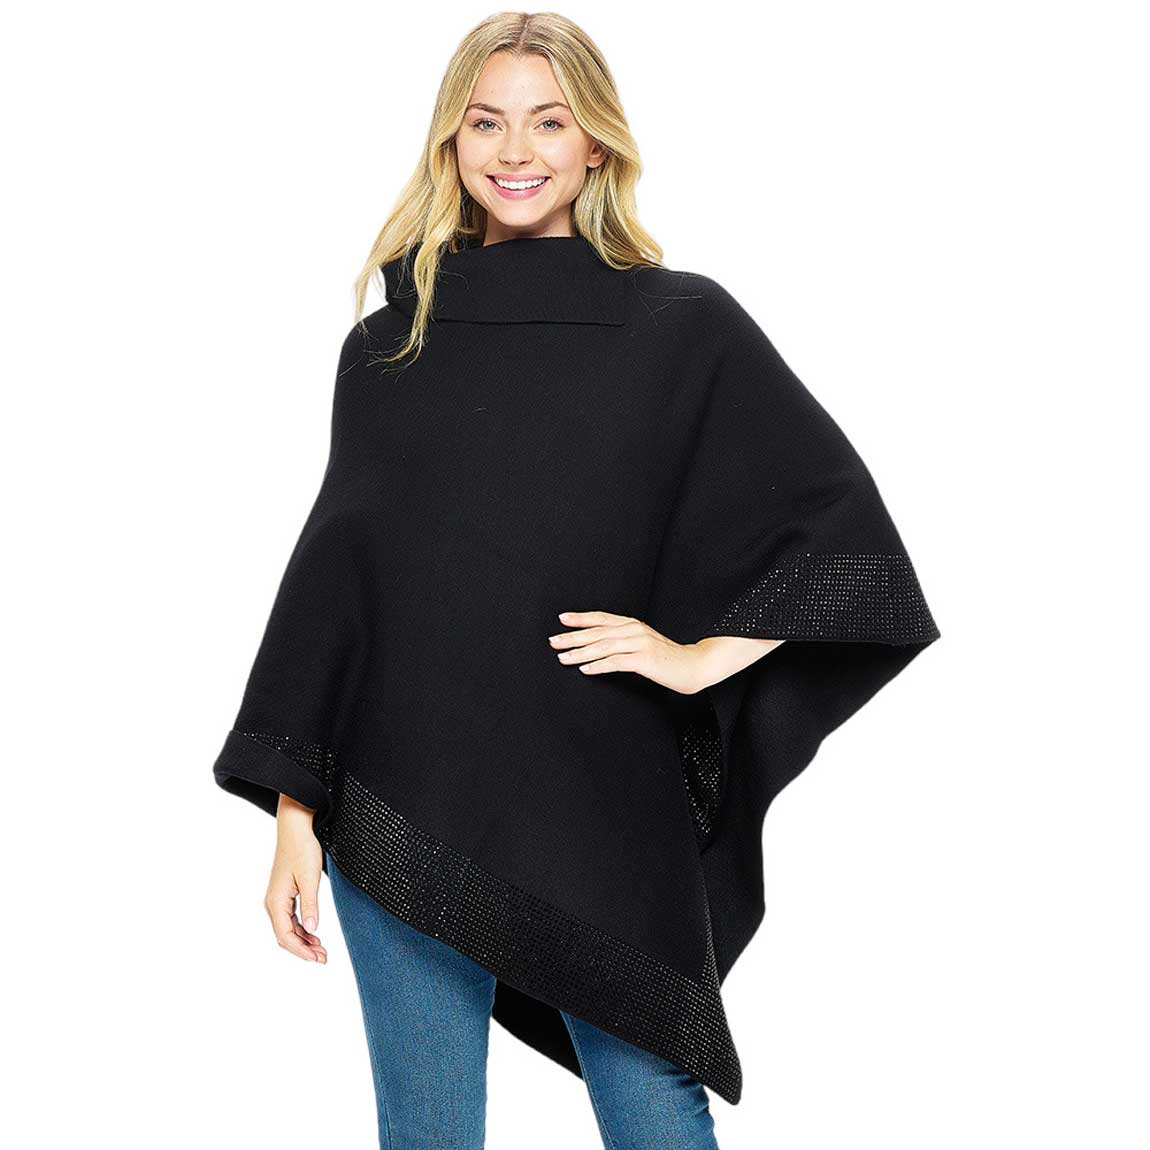 Jet Black Bling Border Solid Neck Poncho, with the latest trend in ladies' outfit cover-up! the high-quality knit neck poncho is soft, comfortable, and warm but lightweight. Stay protected from the chilly weather while taking your elegant looks to a whole new level with an eye-catching, luxurious casual outfit for women!